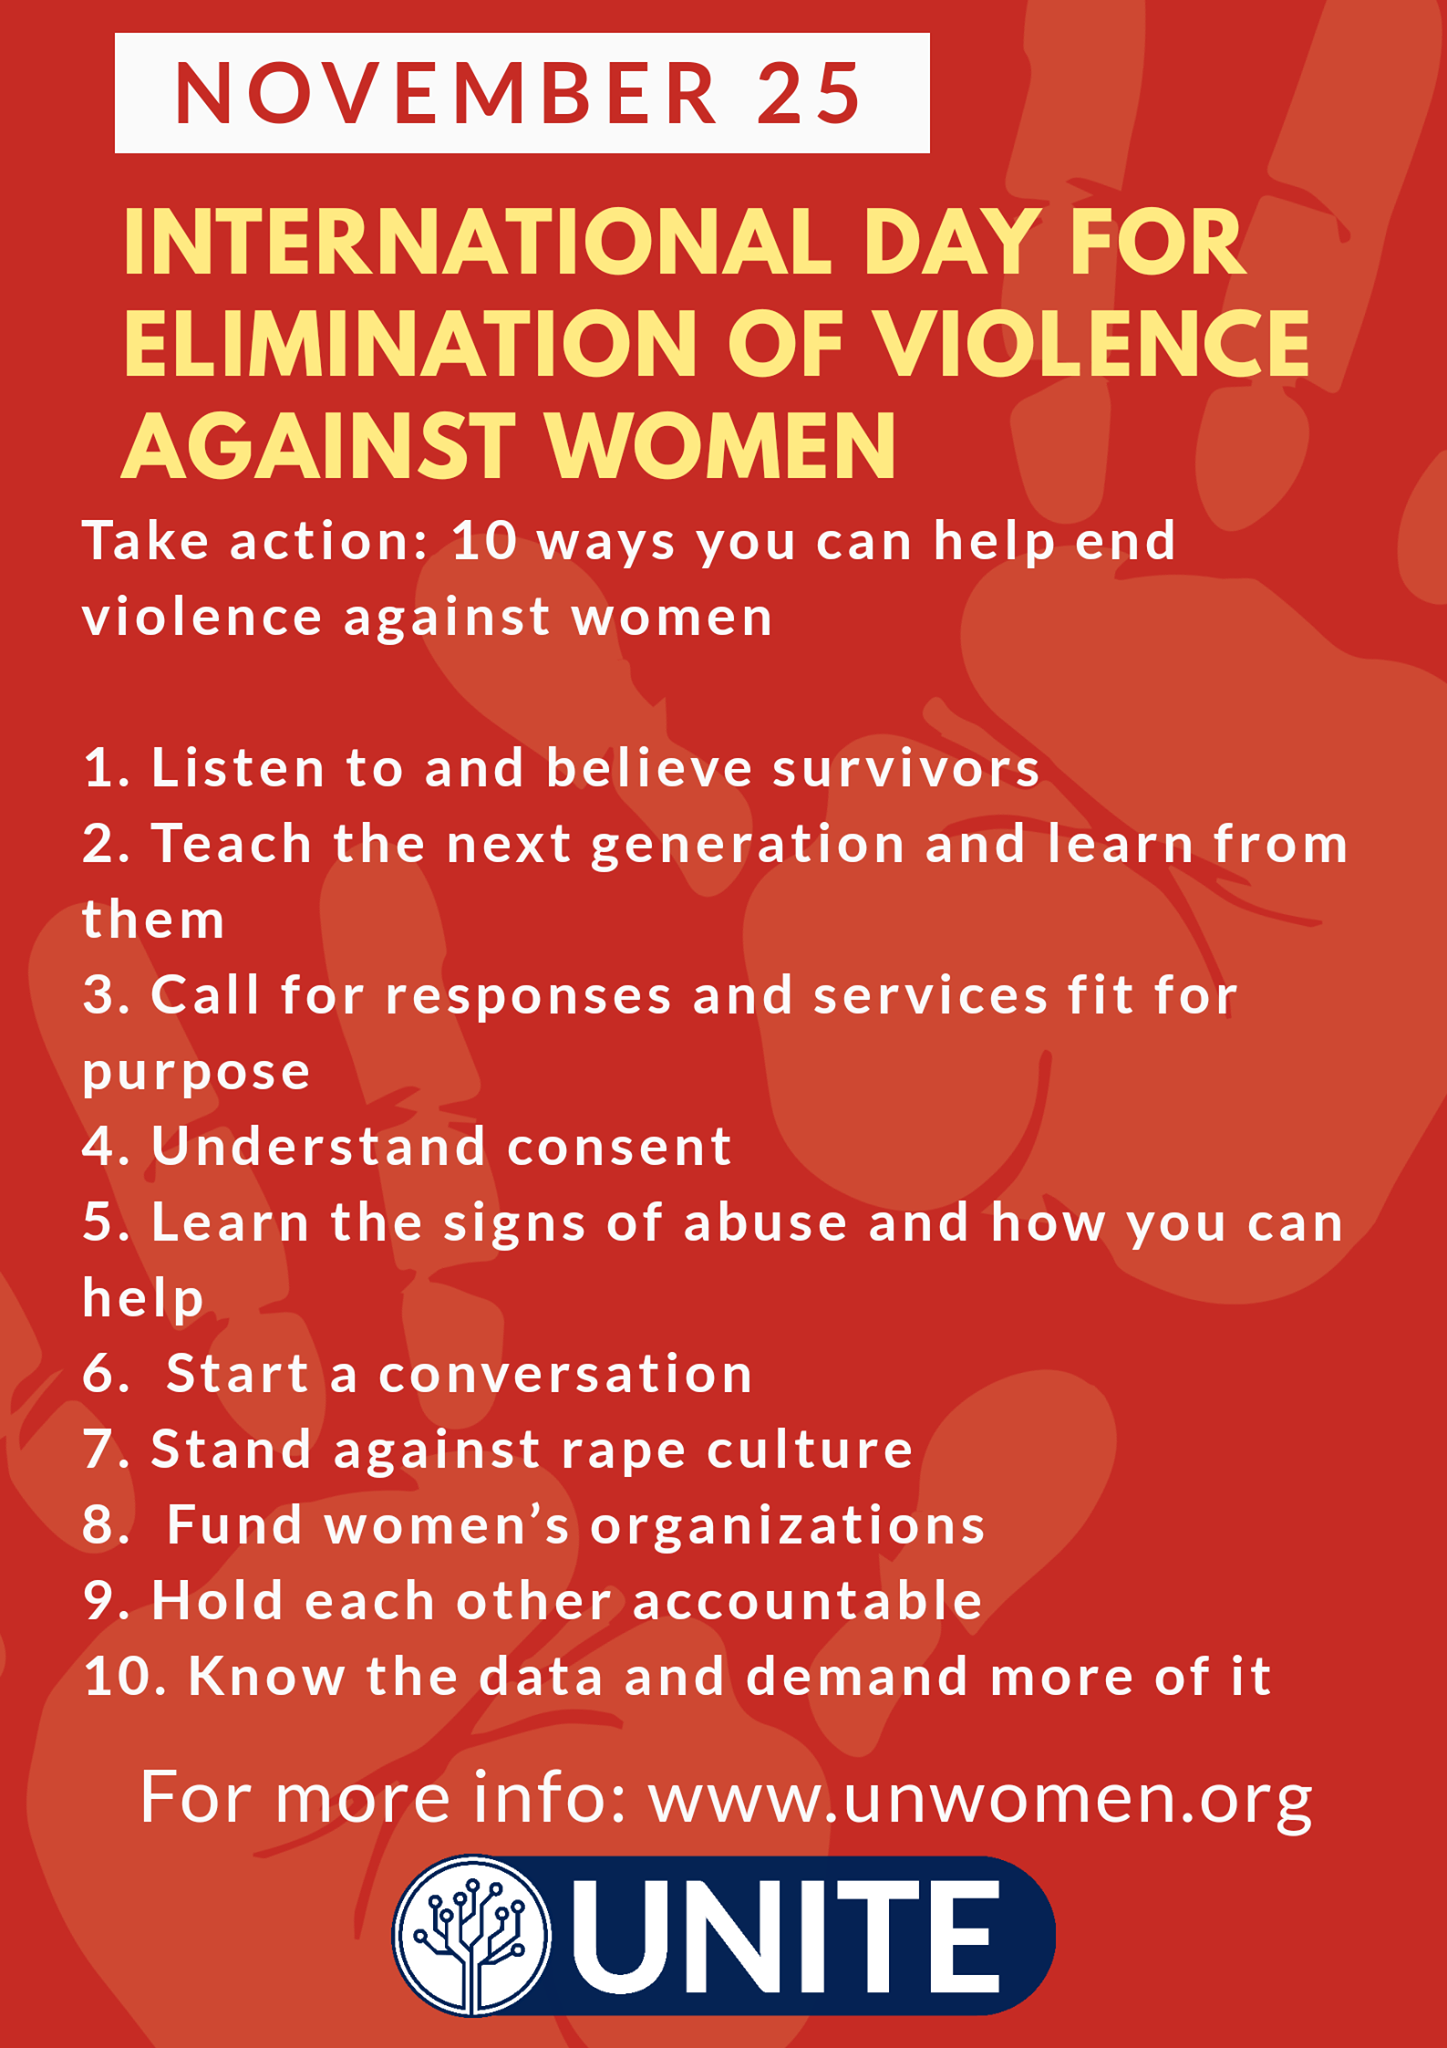 Ending violence against women is everyone’s business.